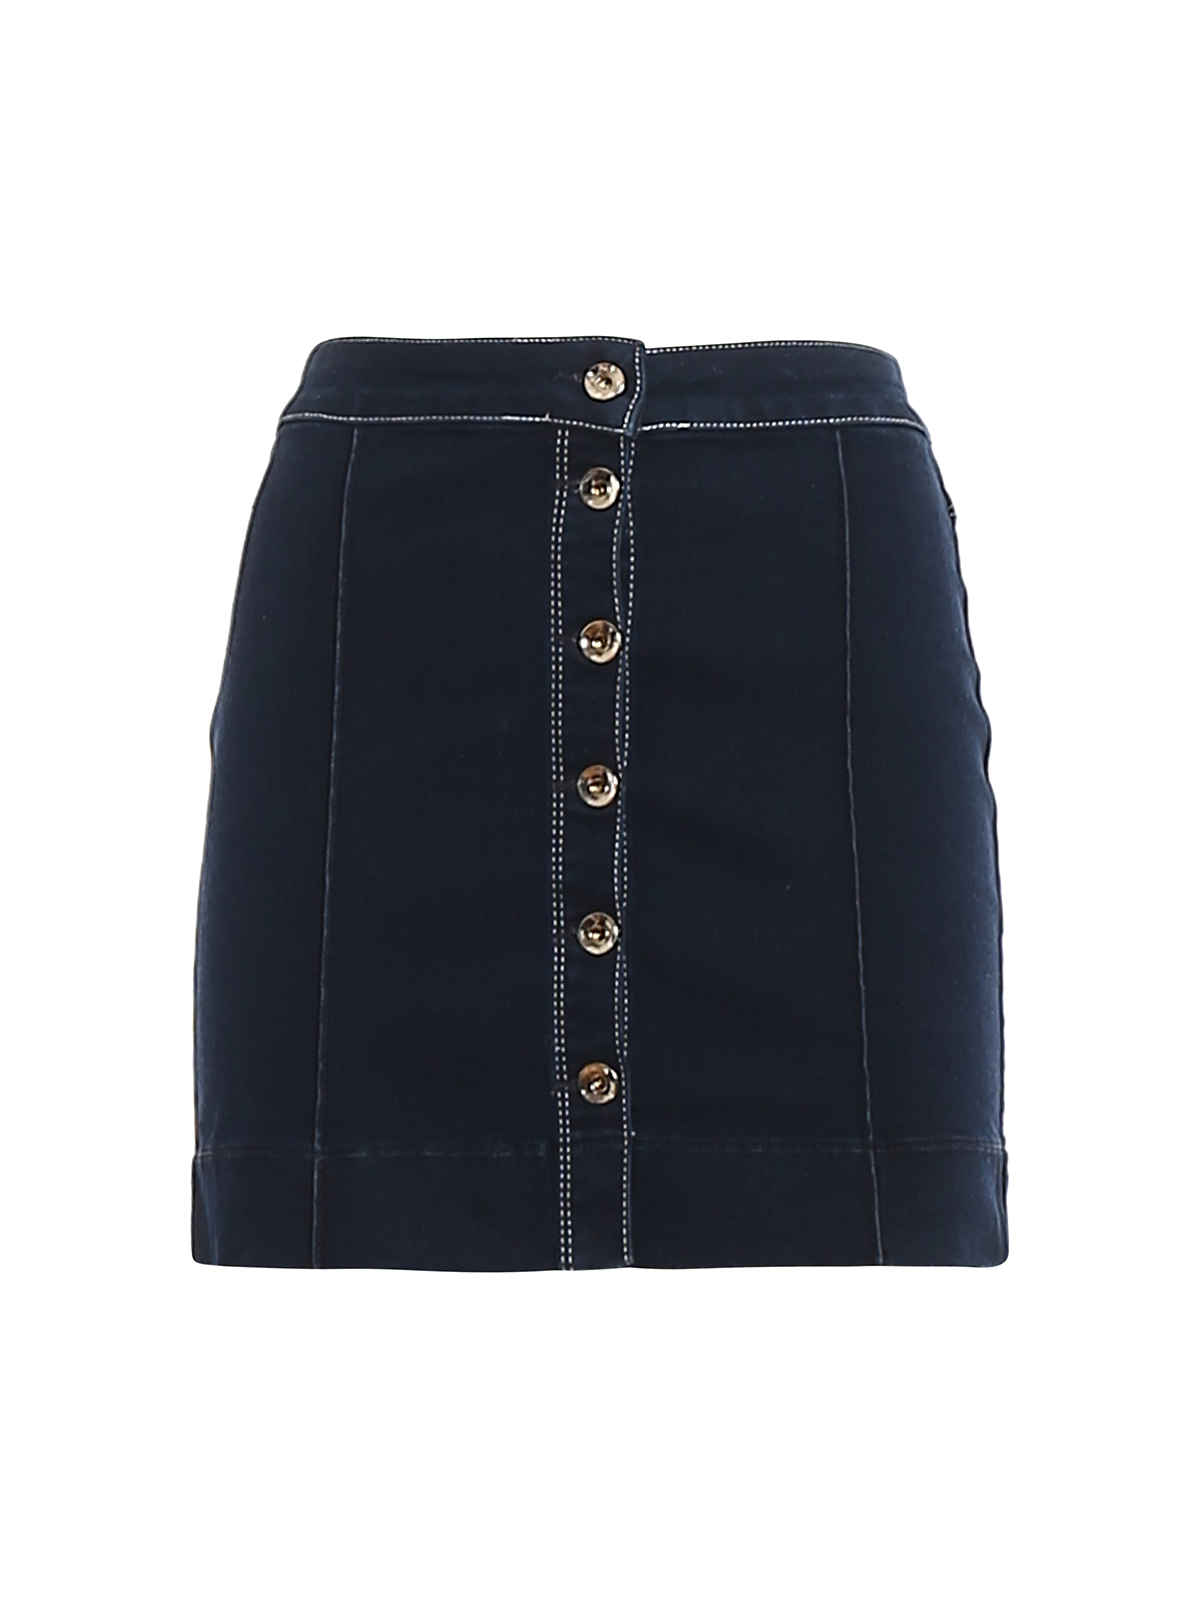 Pepe Jeans Britney skirt blue - ESD Store fashion, footwear and accessories  - best brands shoes and designer shoes